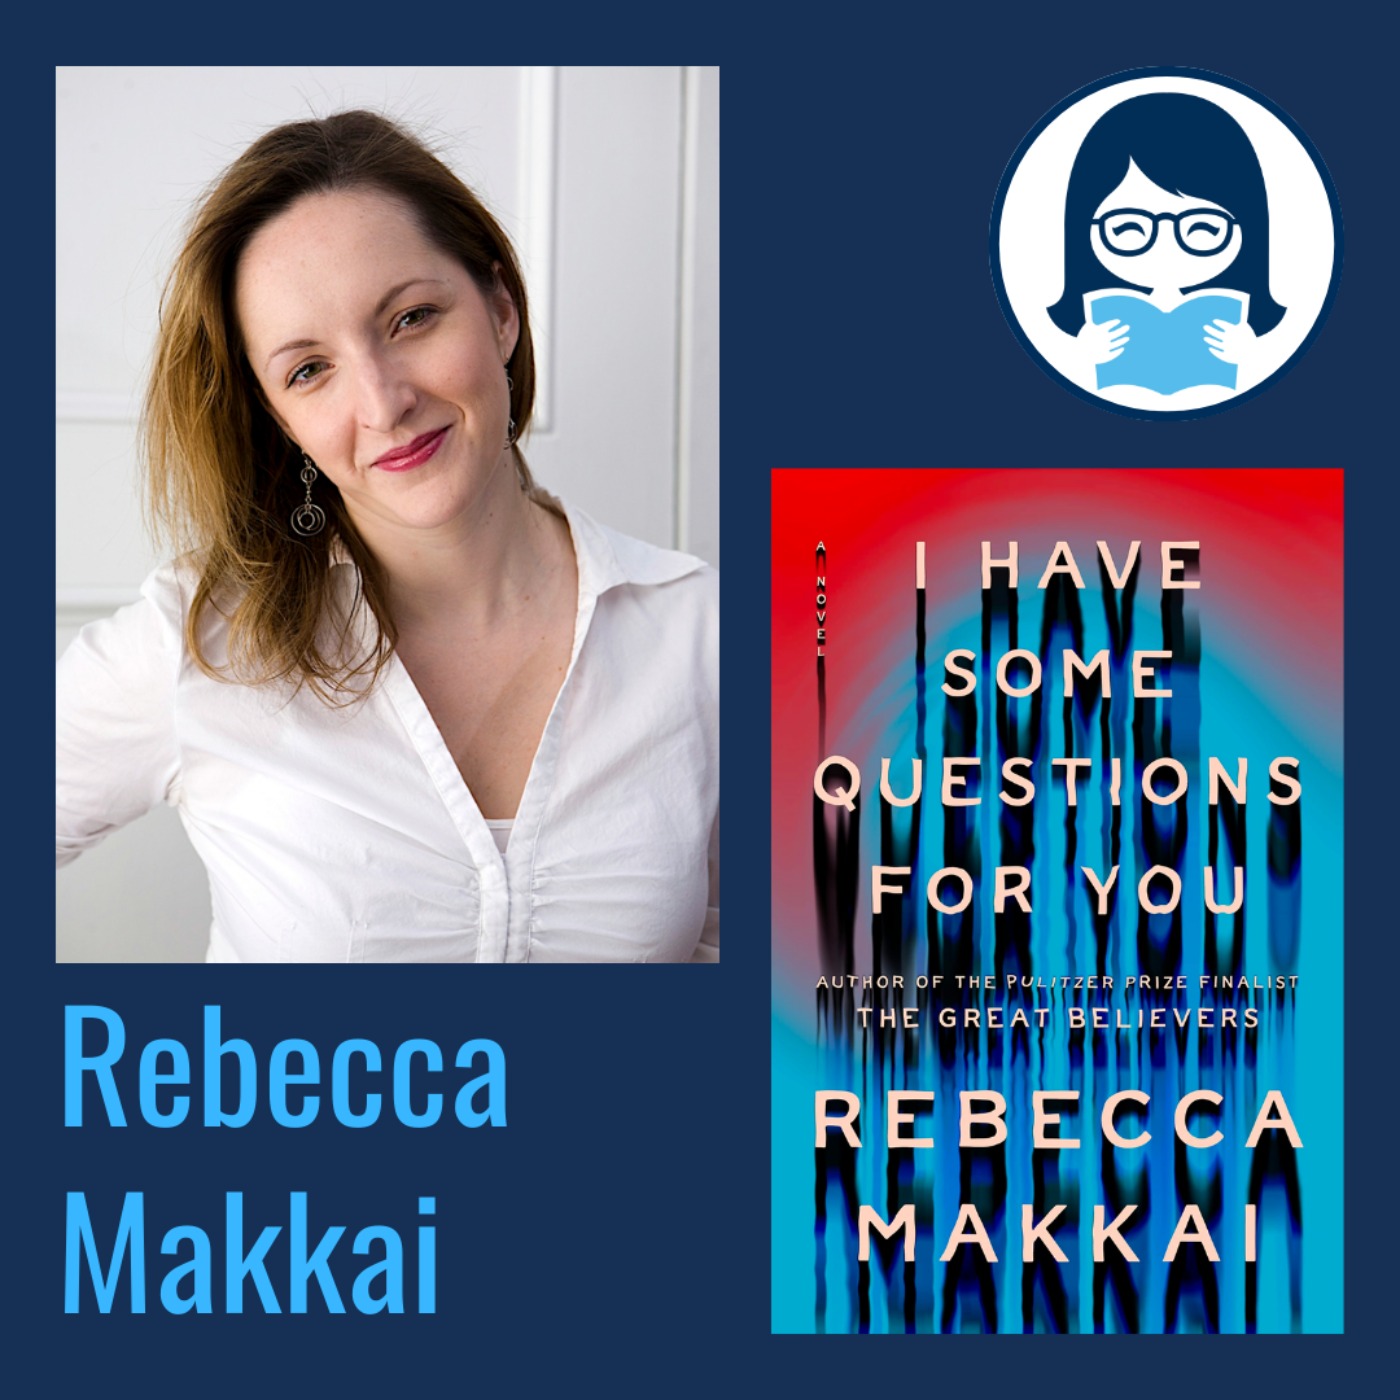 Rebecca Makkai, I HAVE SOME QUESTIONS FOR YOU